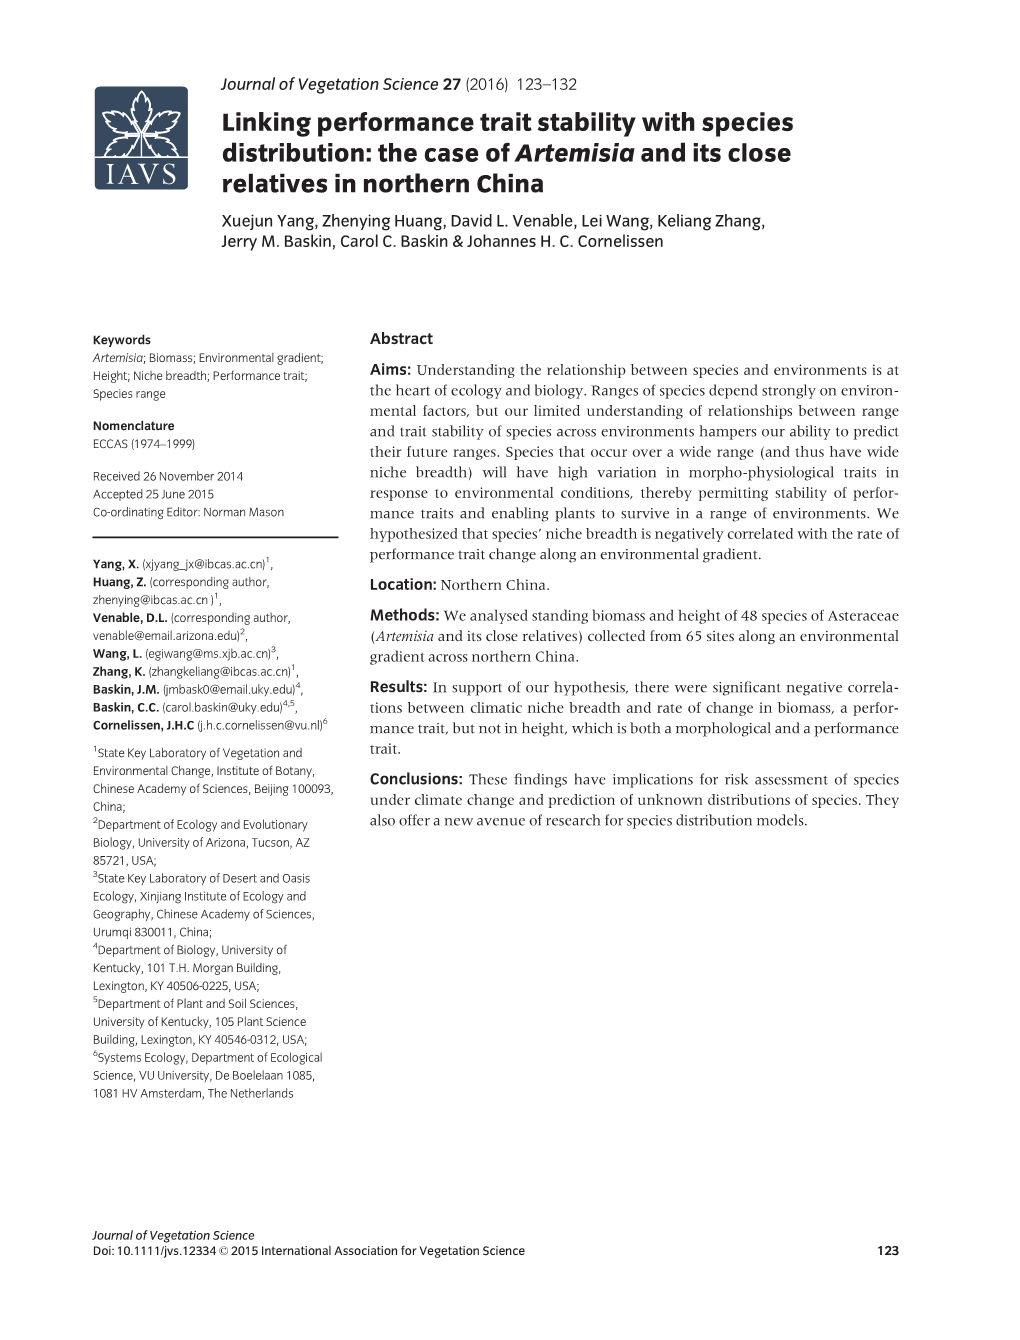 Linking Performance Trait Stability with Species Distribution: the Case of Artemisia and Its Close Relatives in Northern China Xuejun Yang, Zhenying Huang, David L